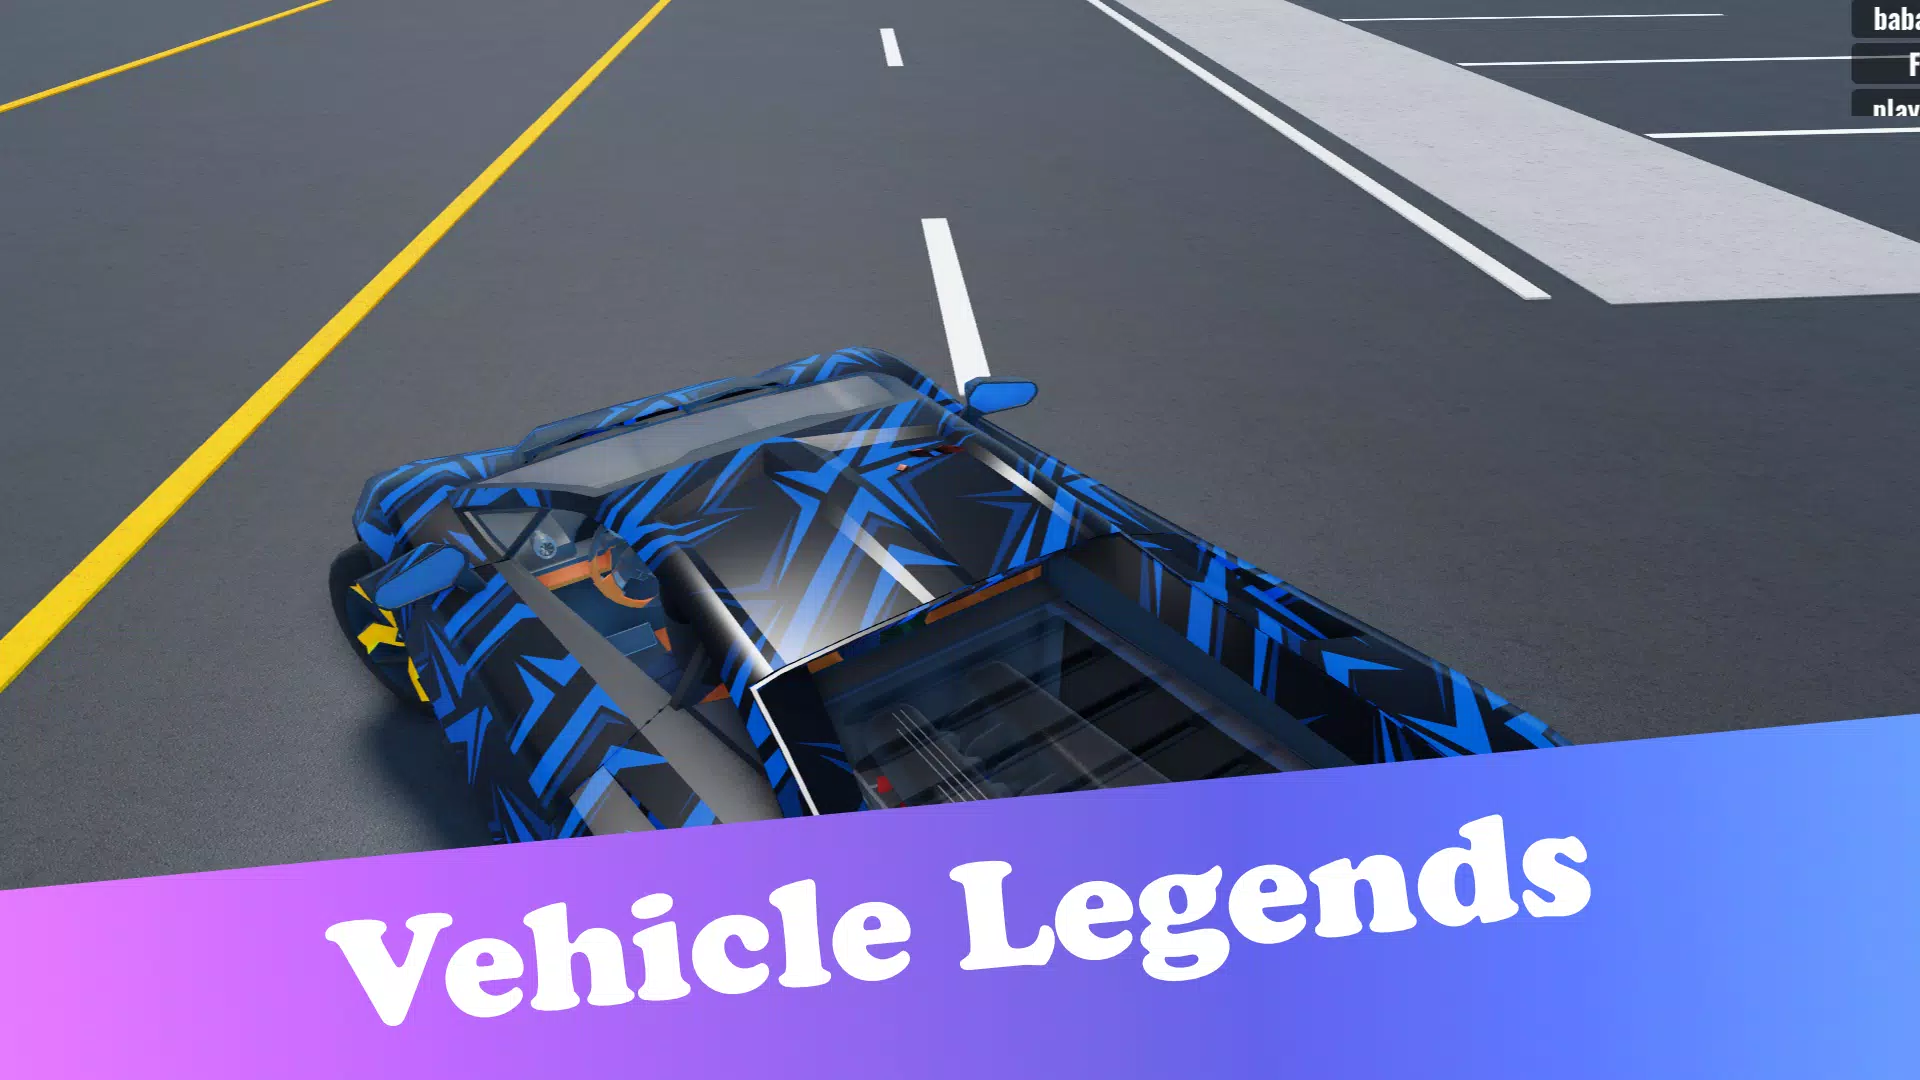 Vehicle Legends 🏎️ NEW CARS! - Roblox